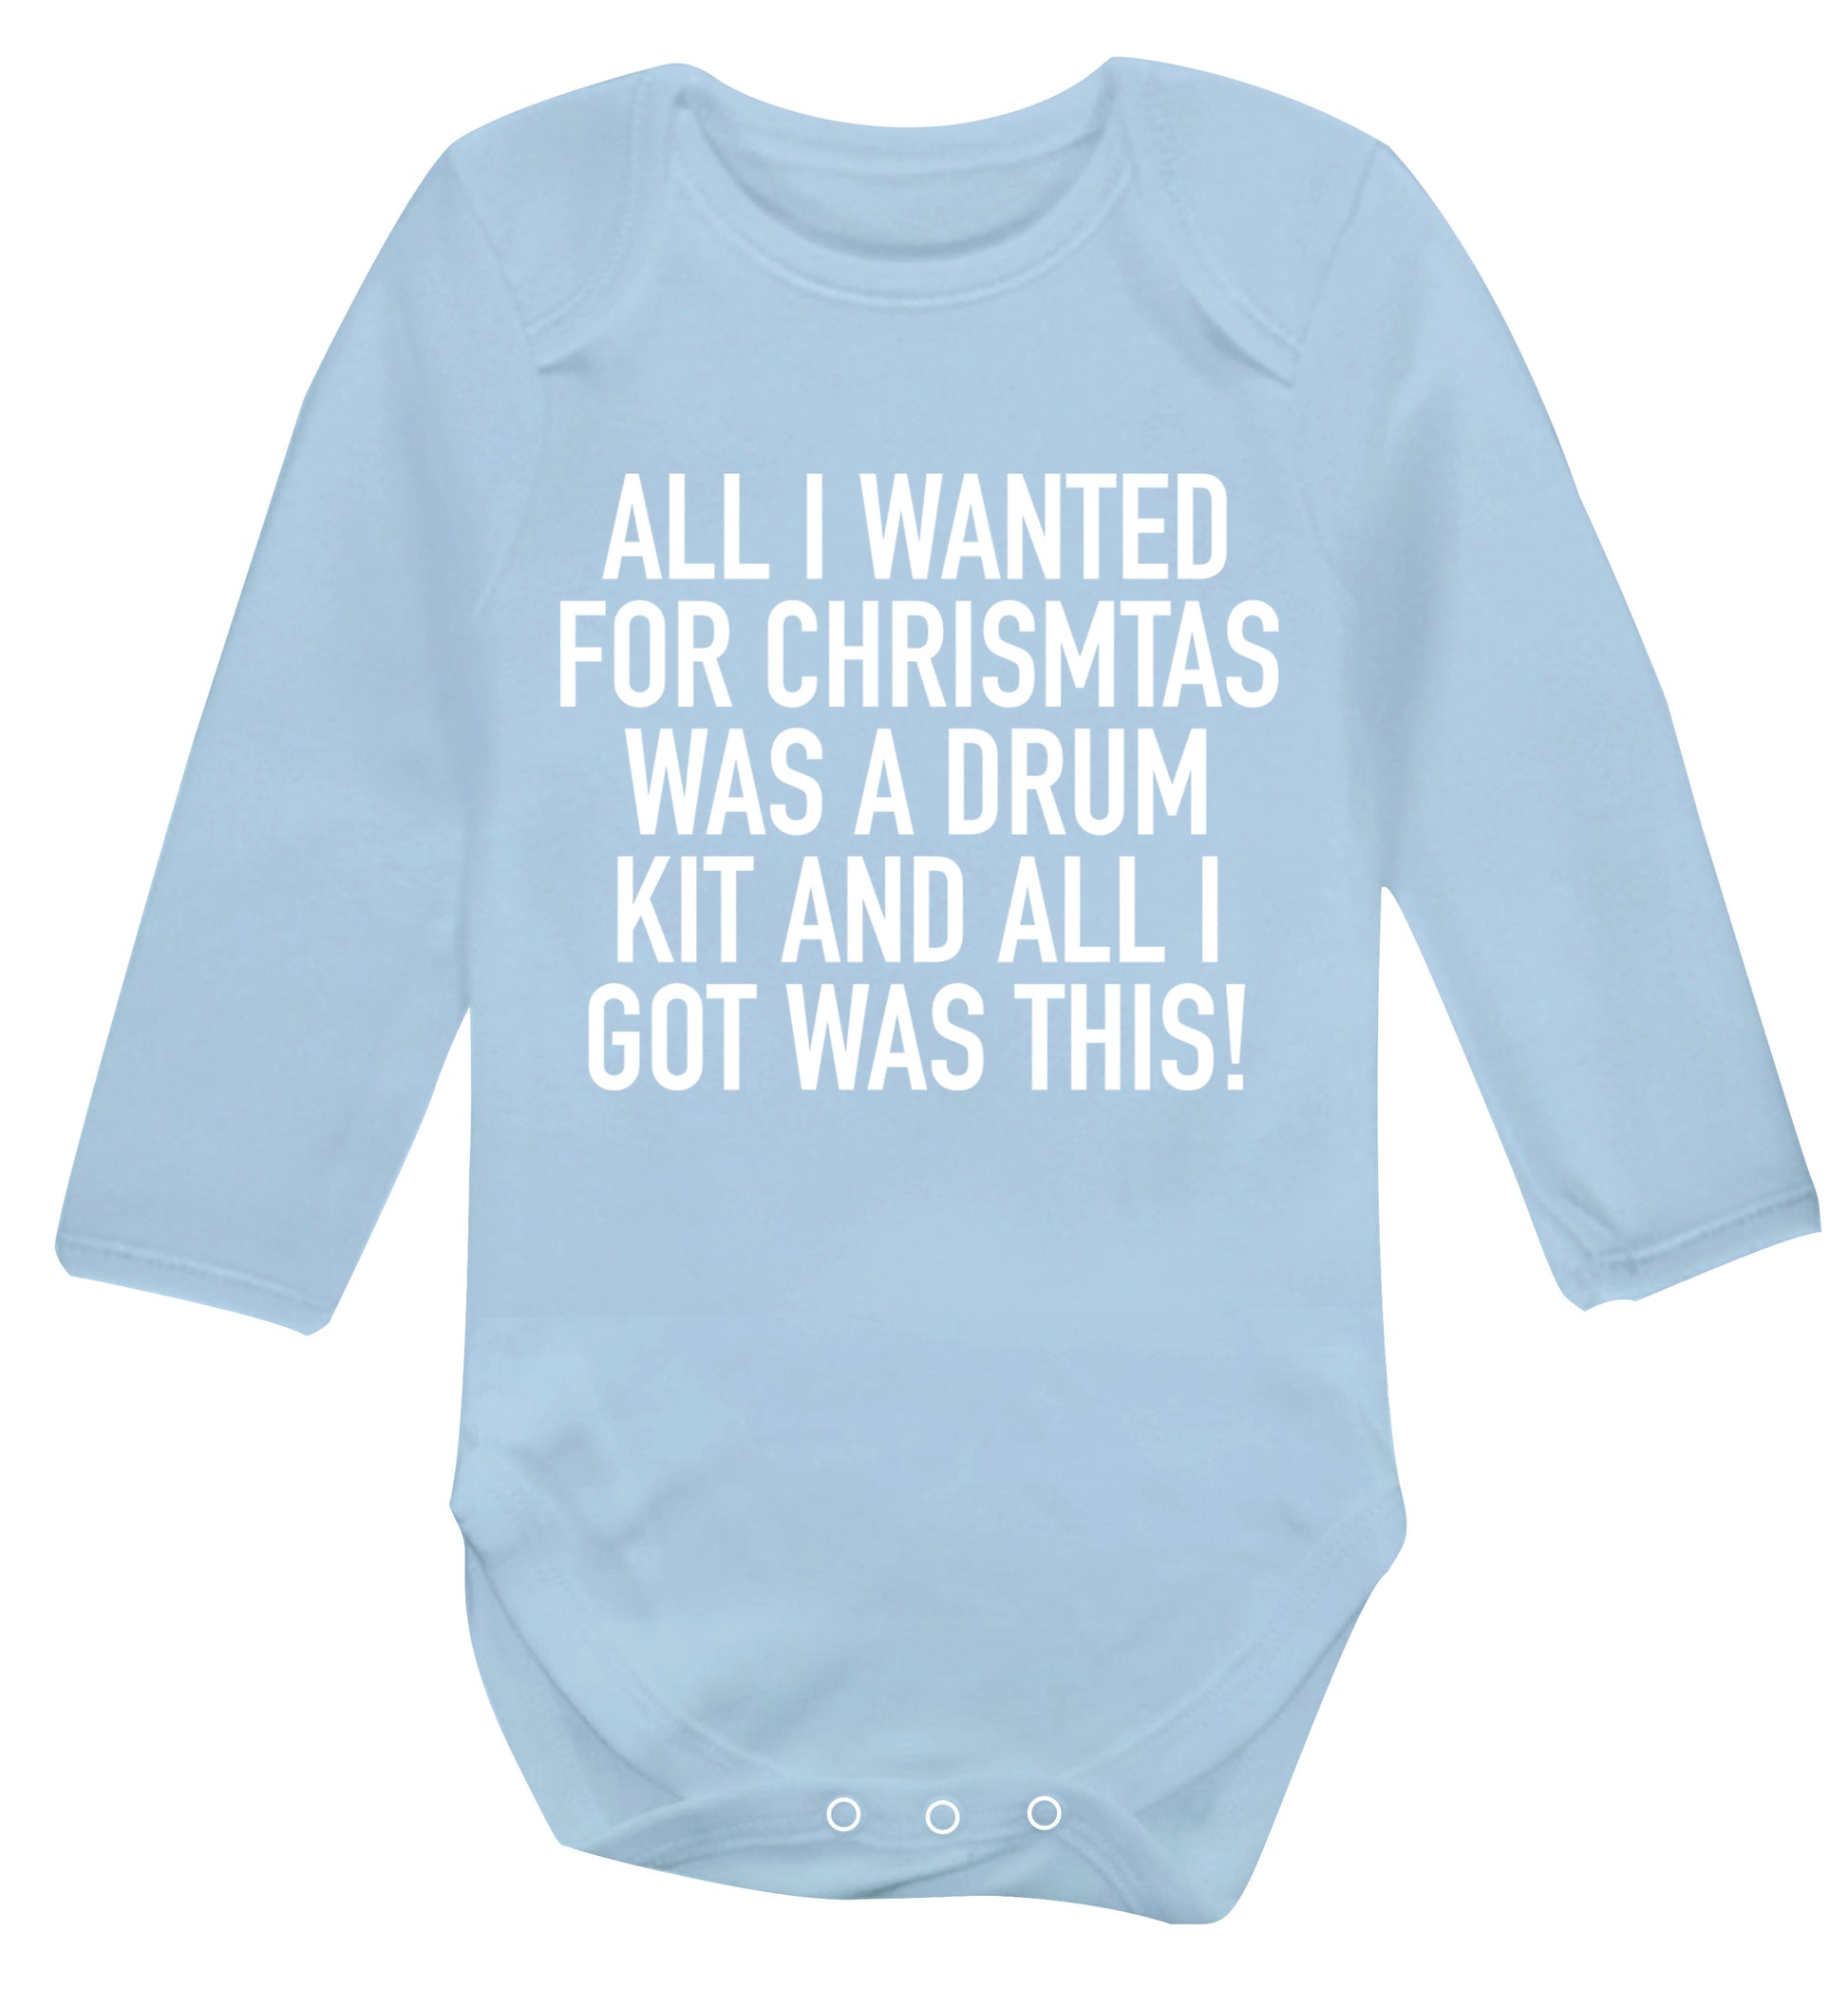 All I wanted for Christmas was a drum kit and all I got was this! Baby Vest long sleeved pale blue 6-12 months